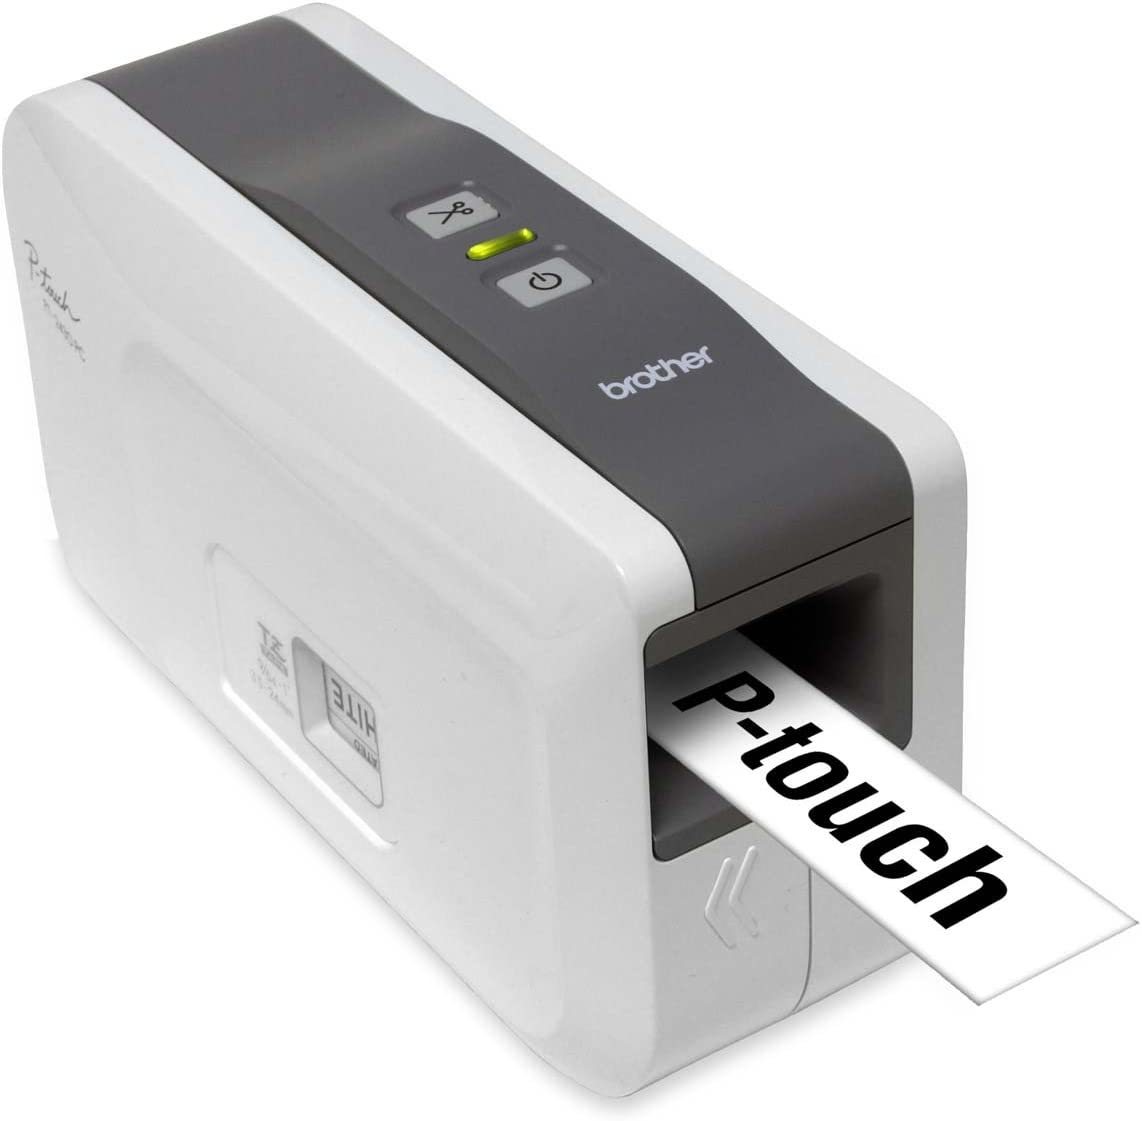 Label Maker With Auto Cutter That Is Pc-Connectable From Brother (Pt-2430Pc). - $347.98